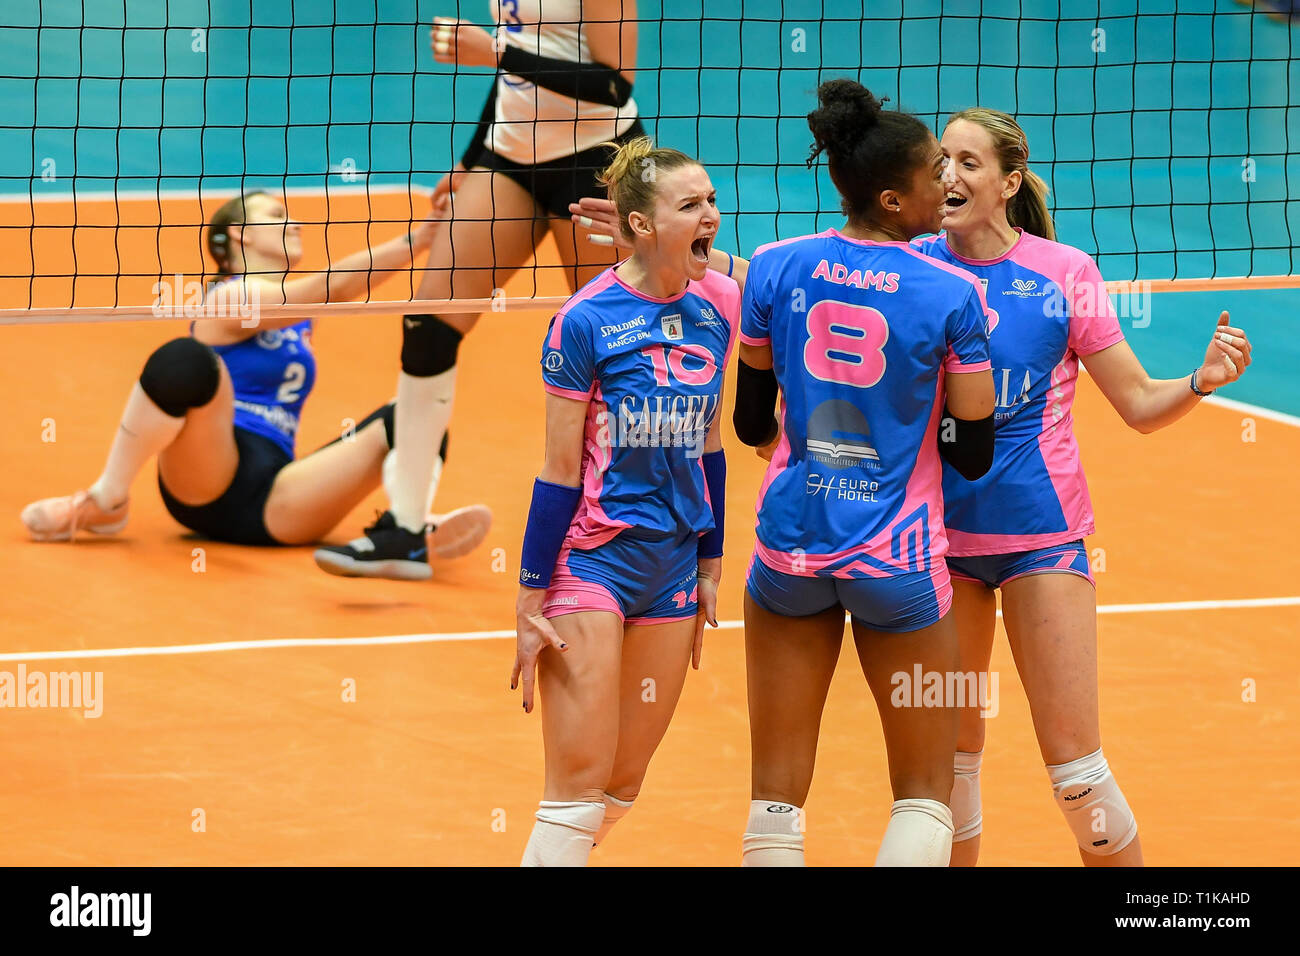 Candy Arena, Monza, Italy. 27th March, 2019. CEV Volleyball Challenge Cup women, Final, 2nd leg. Saugella Monza team exultation during the match between Saugella Monza and Aydin BBSK at the Candy Arena Italy.  Credit: Claudio Grassi/Alamy Live News Stock Photo